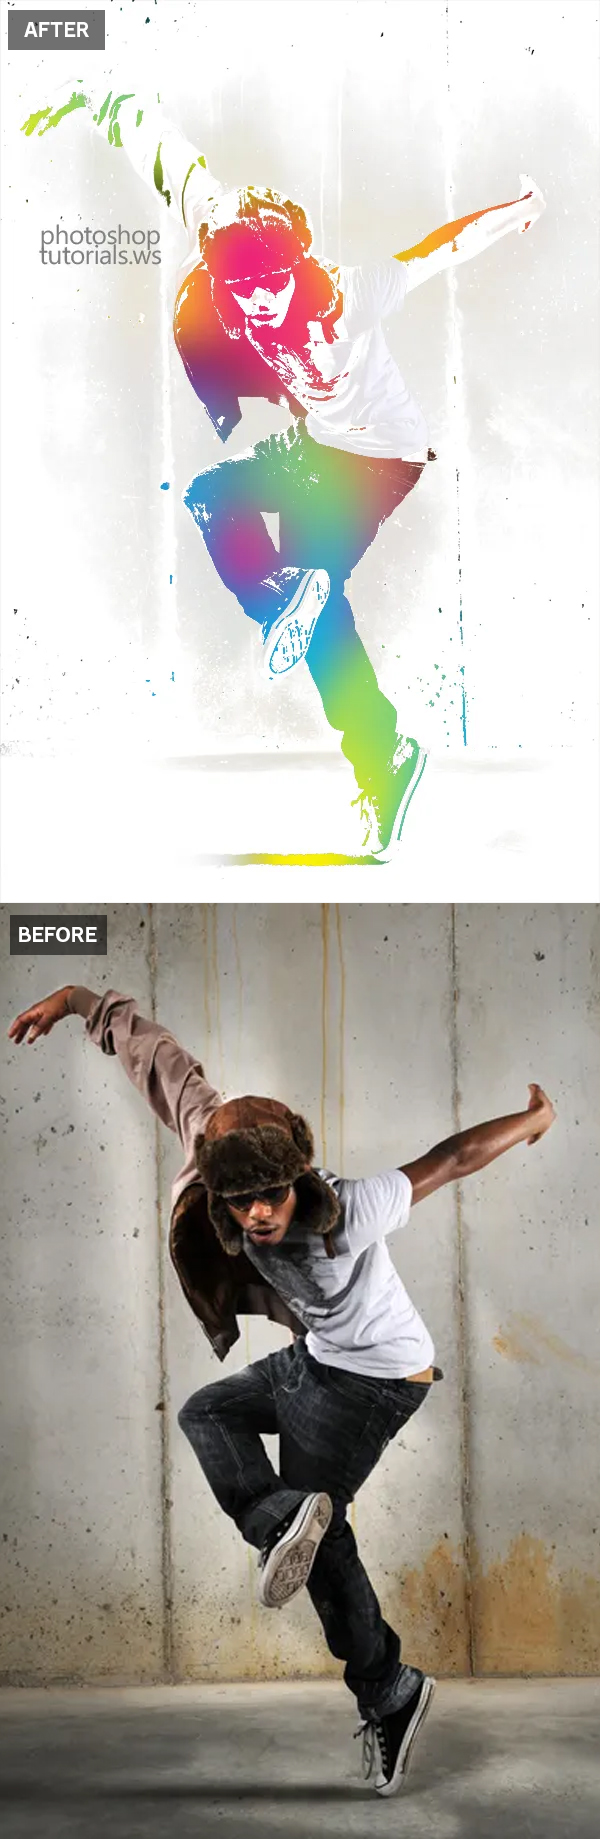 How to Create Urban Ink Photo Effect in Photoshop Tutorial